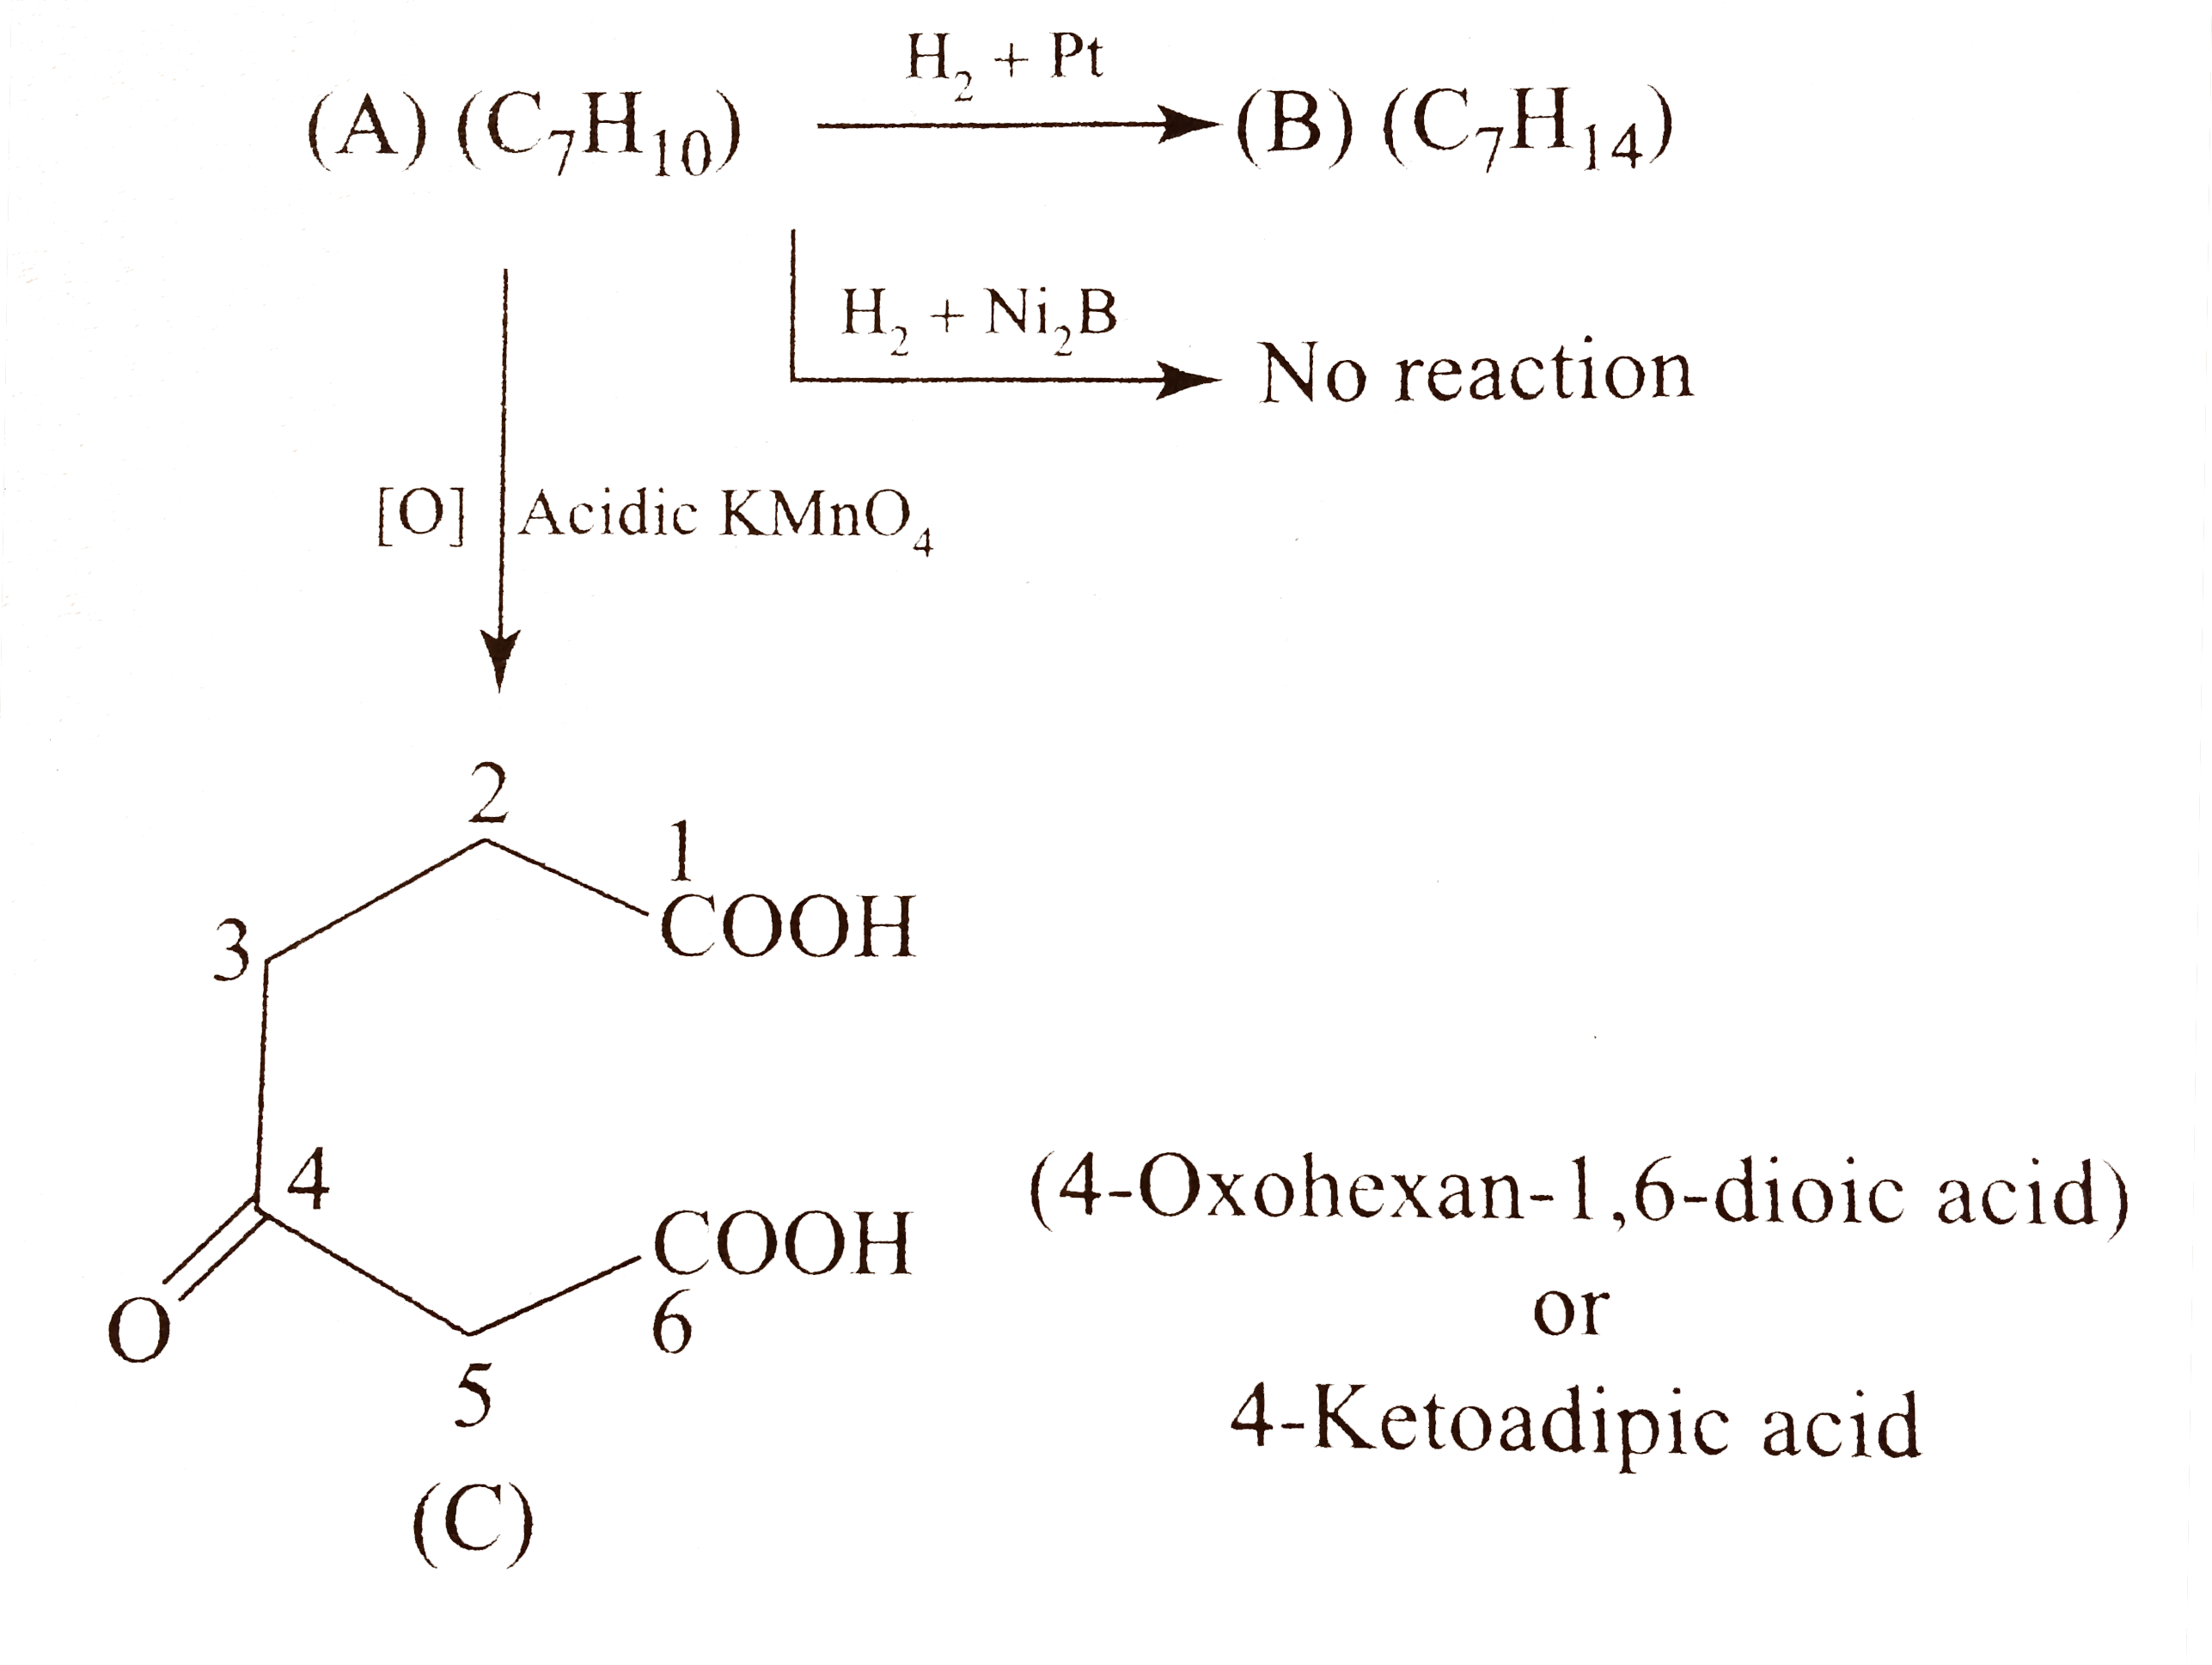 Identify (A), (B),  and (C) in the following reaction.